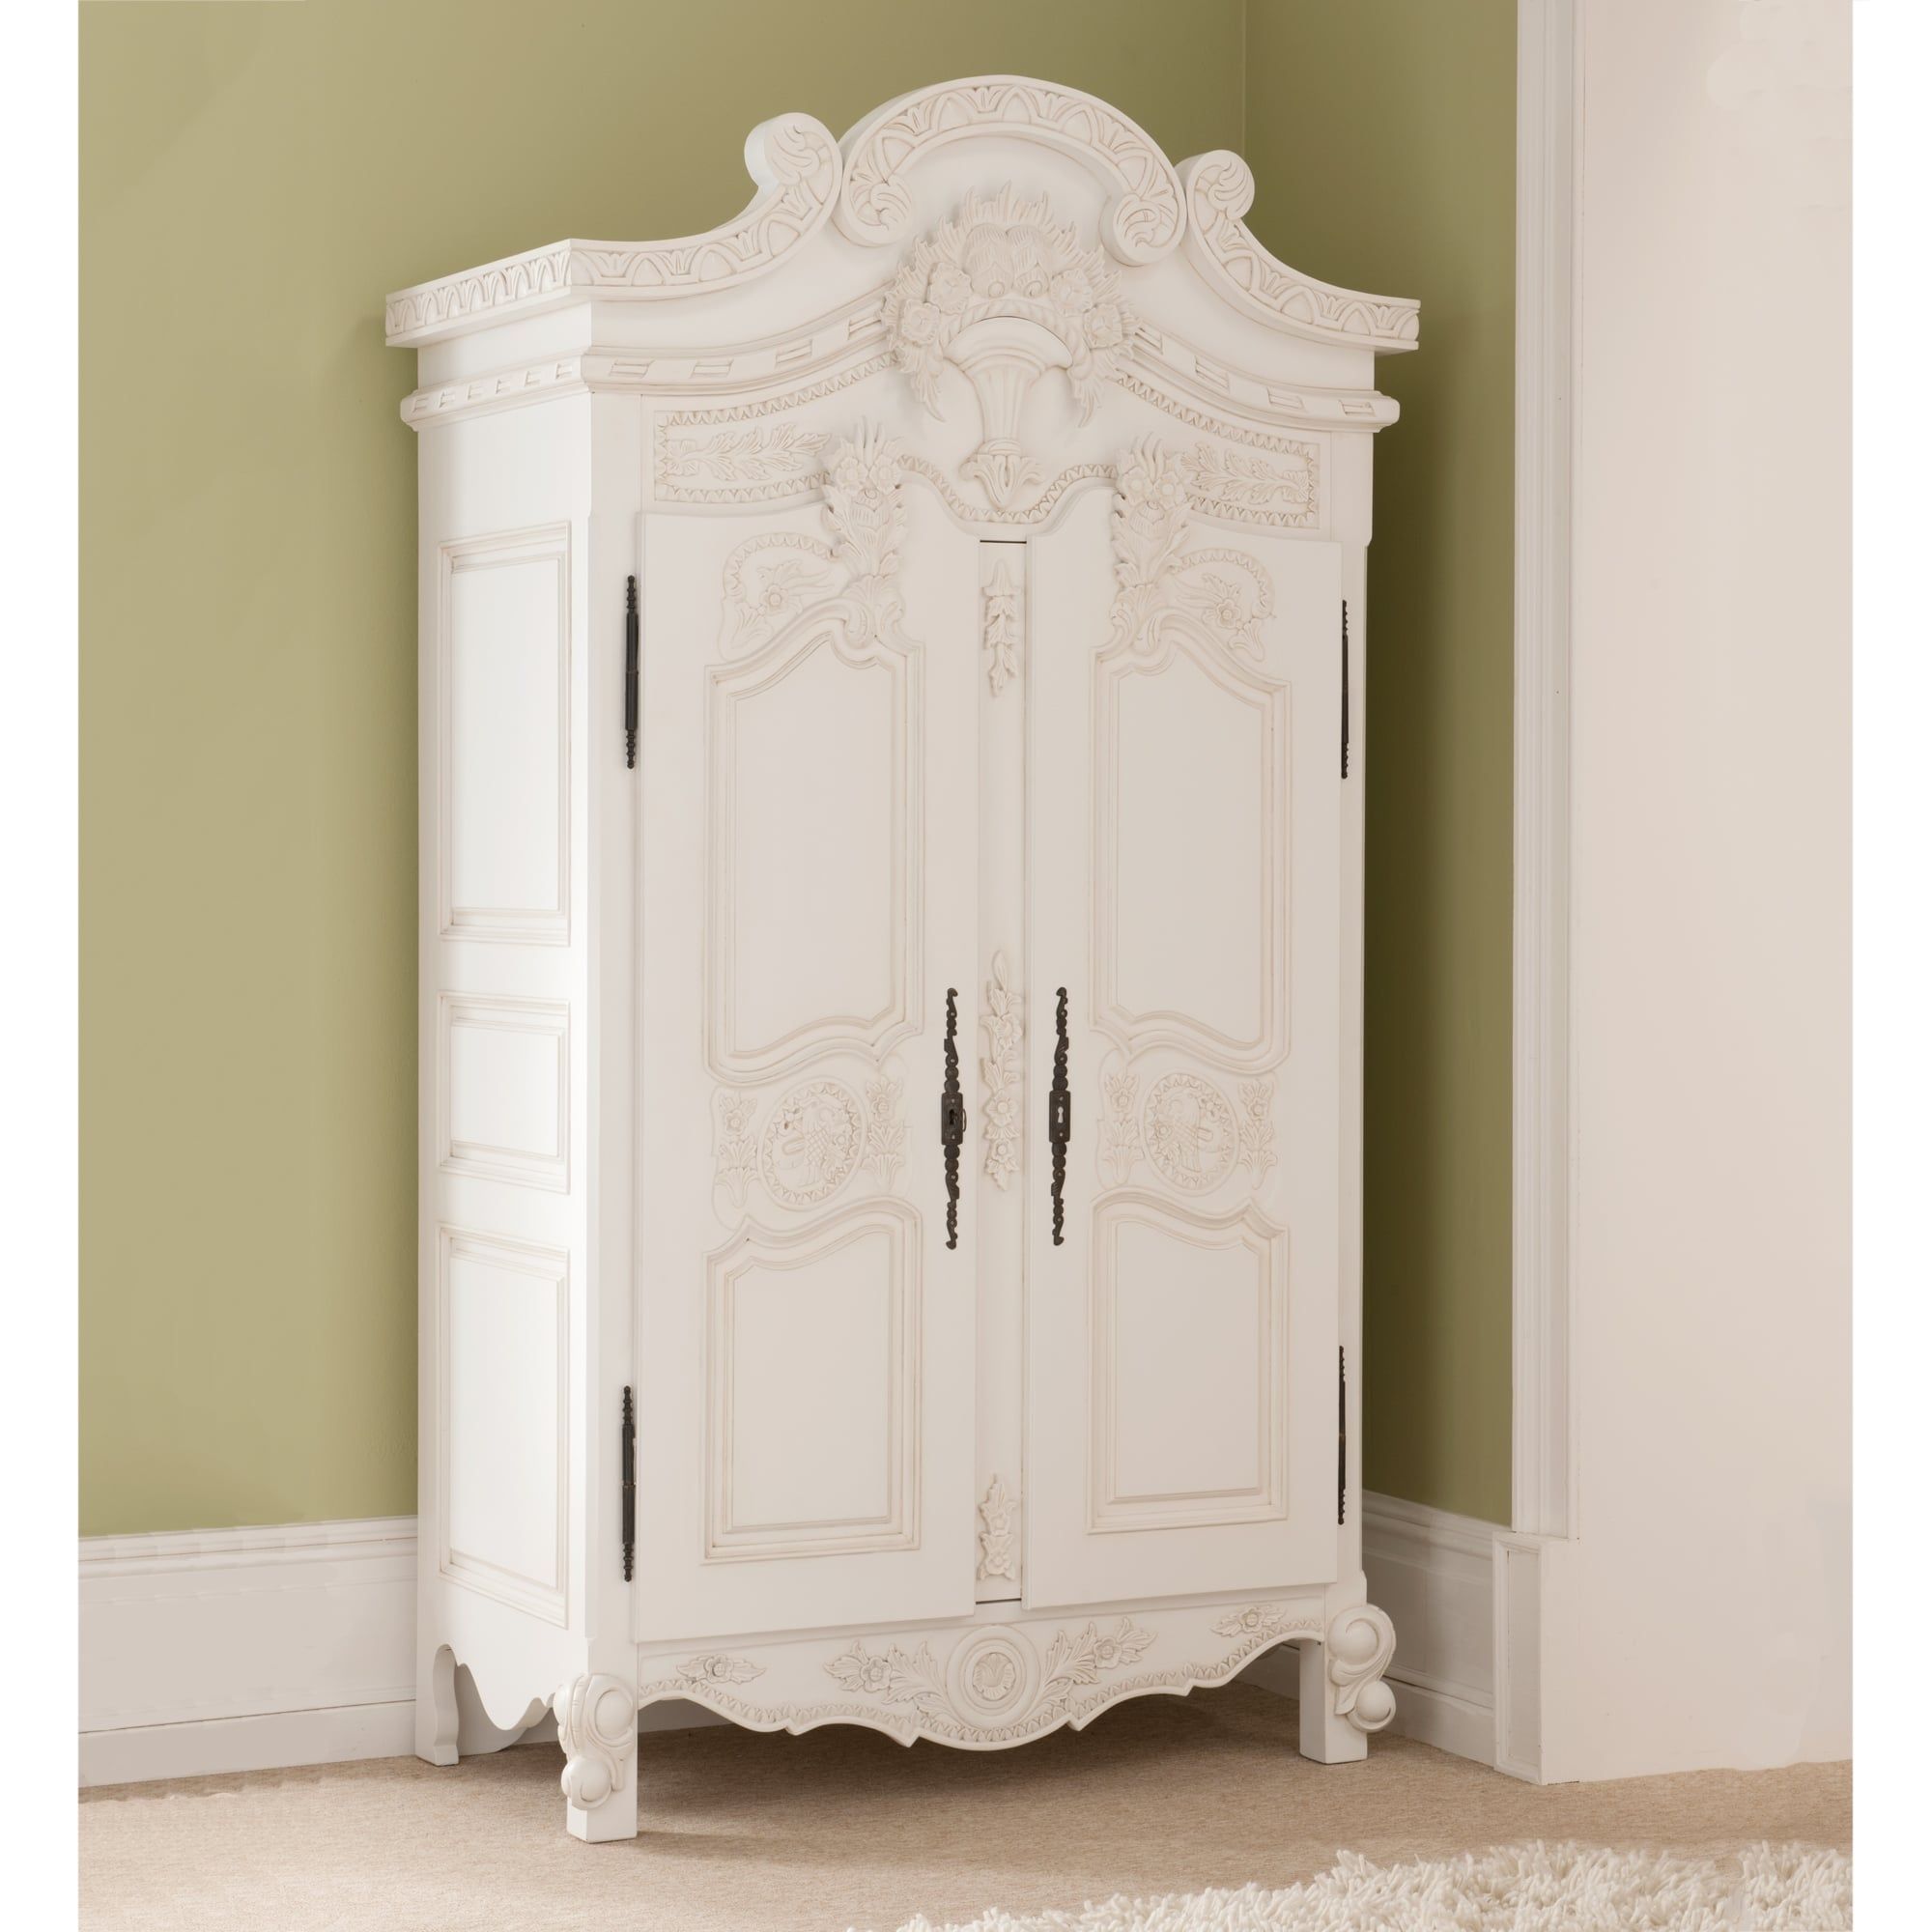 Rococo Antique French Style Wardrobe | Wooden 2 Door Wardrobes With Regard To White French Wardrobes (View 15 of 15)